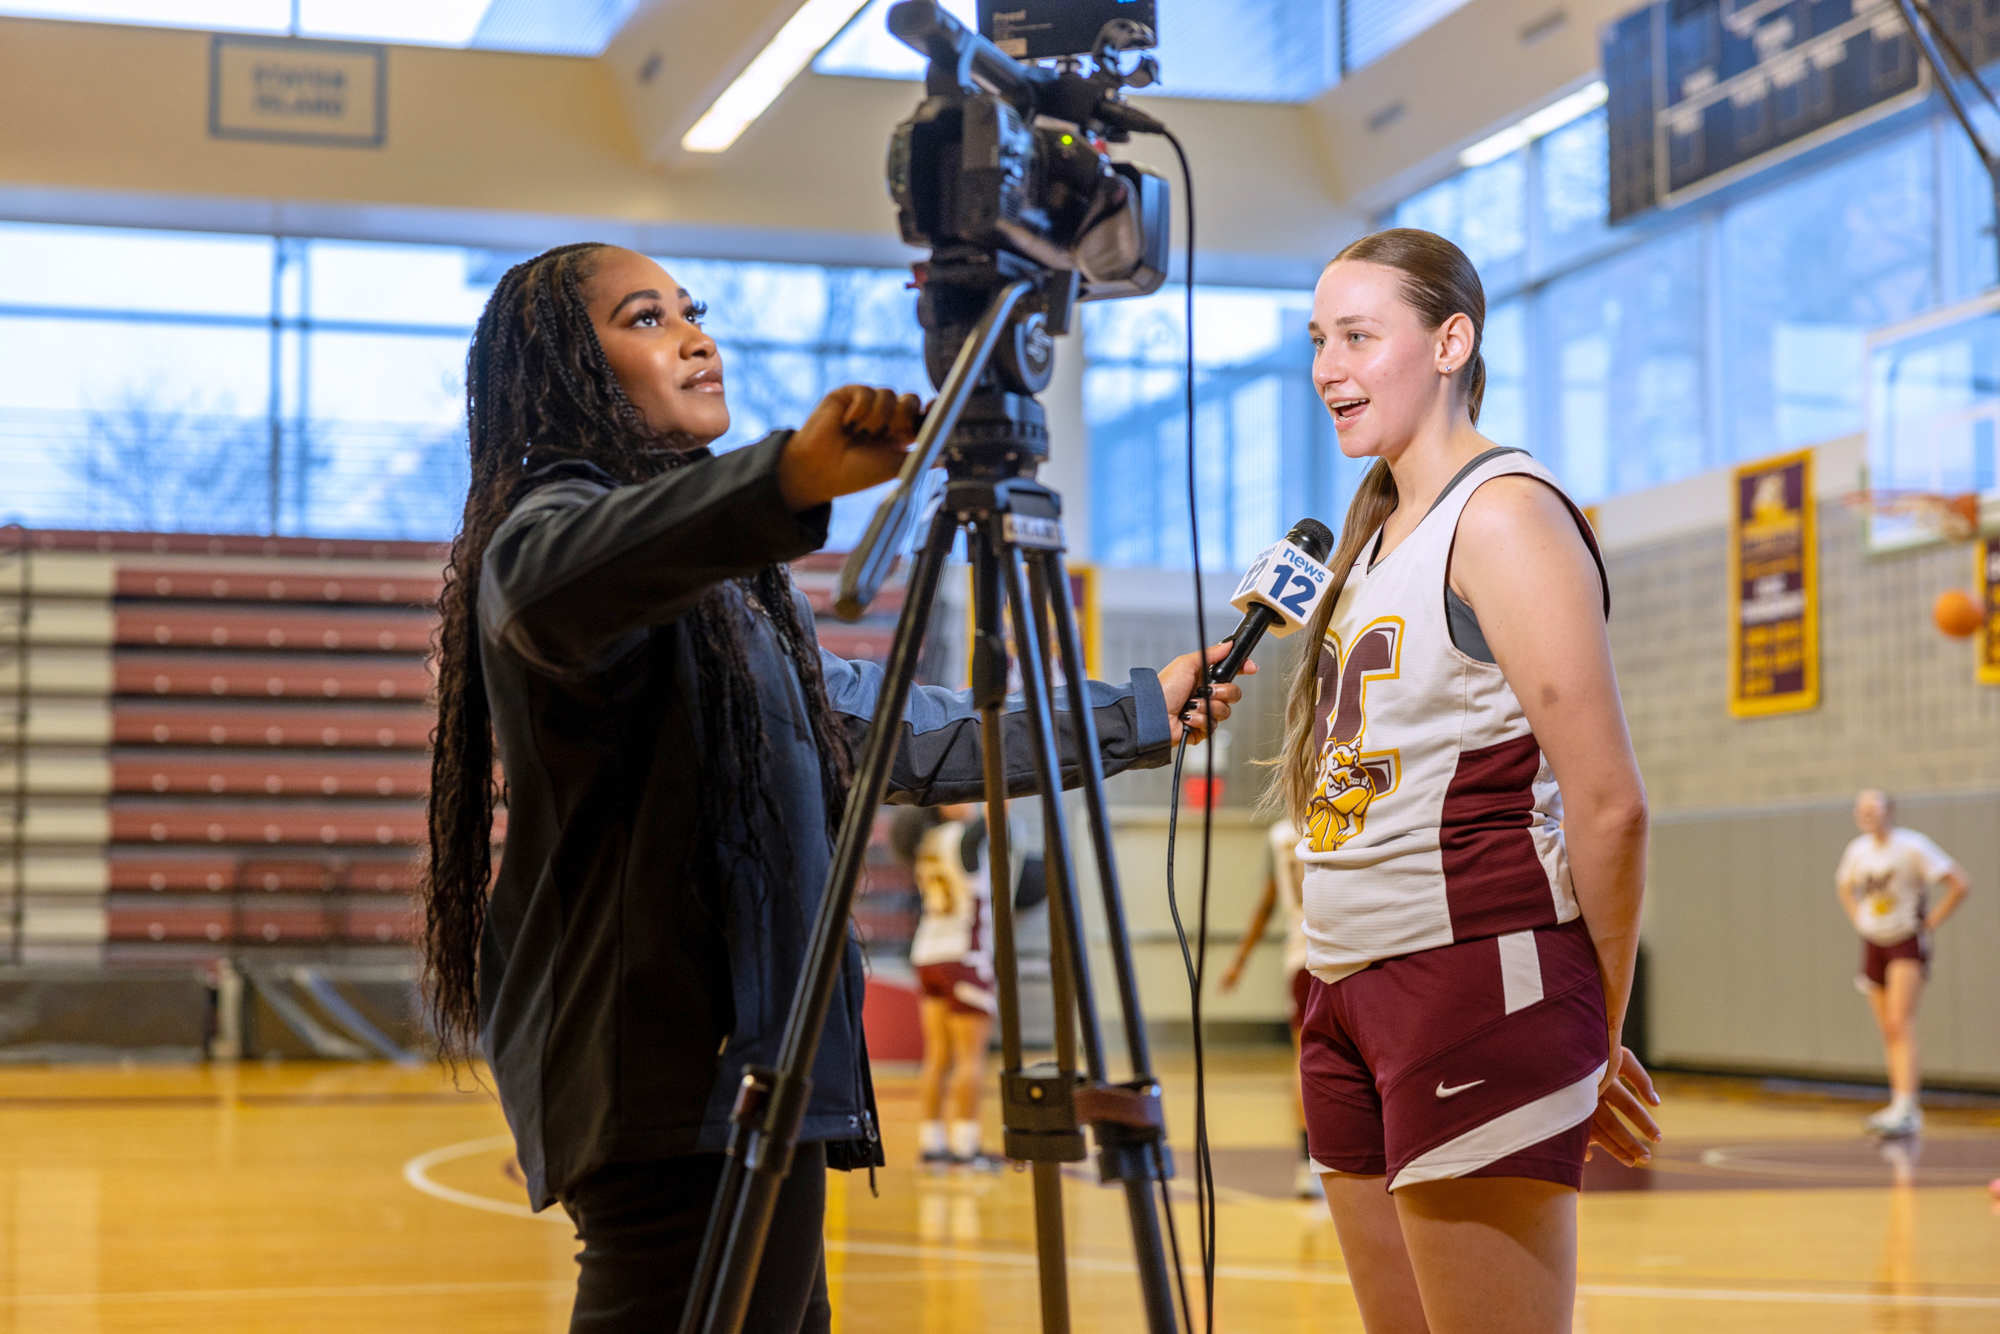 News 12 visited campus to cover the women’s basketball team as they geared up for NCAA Division III tournament after winning a fourth straight CUNY title.